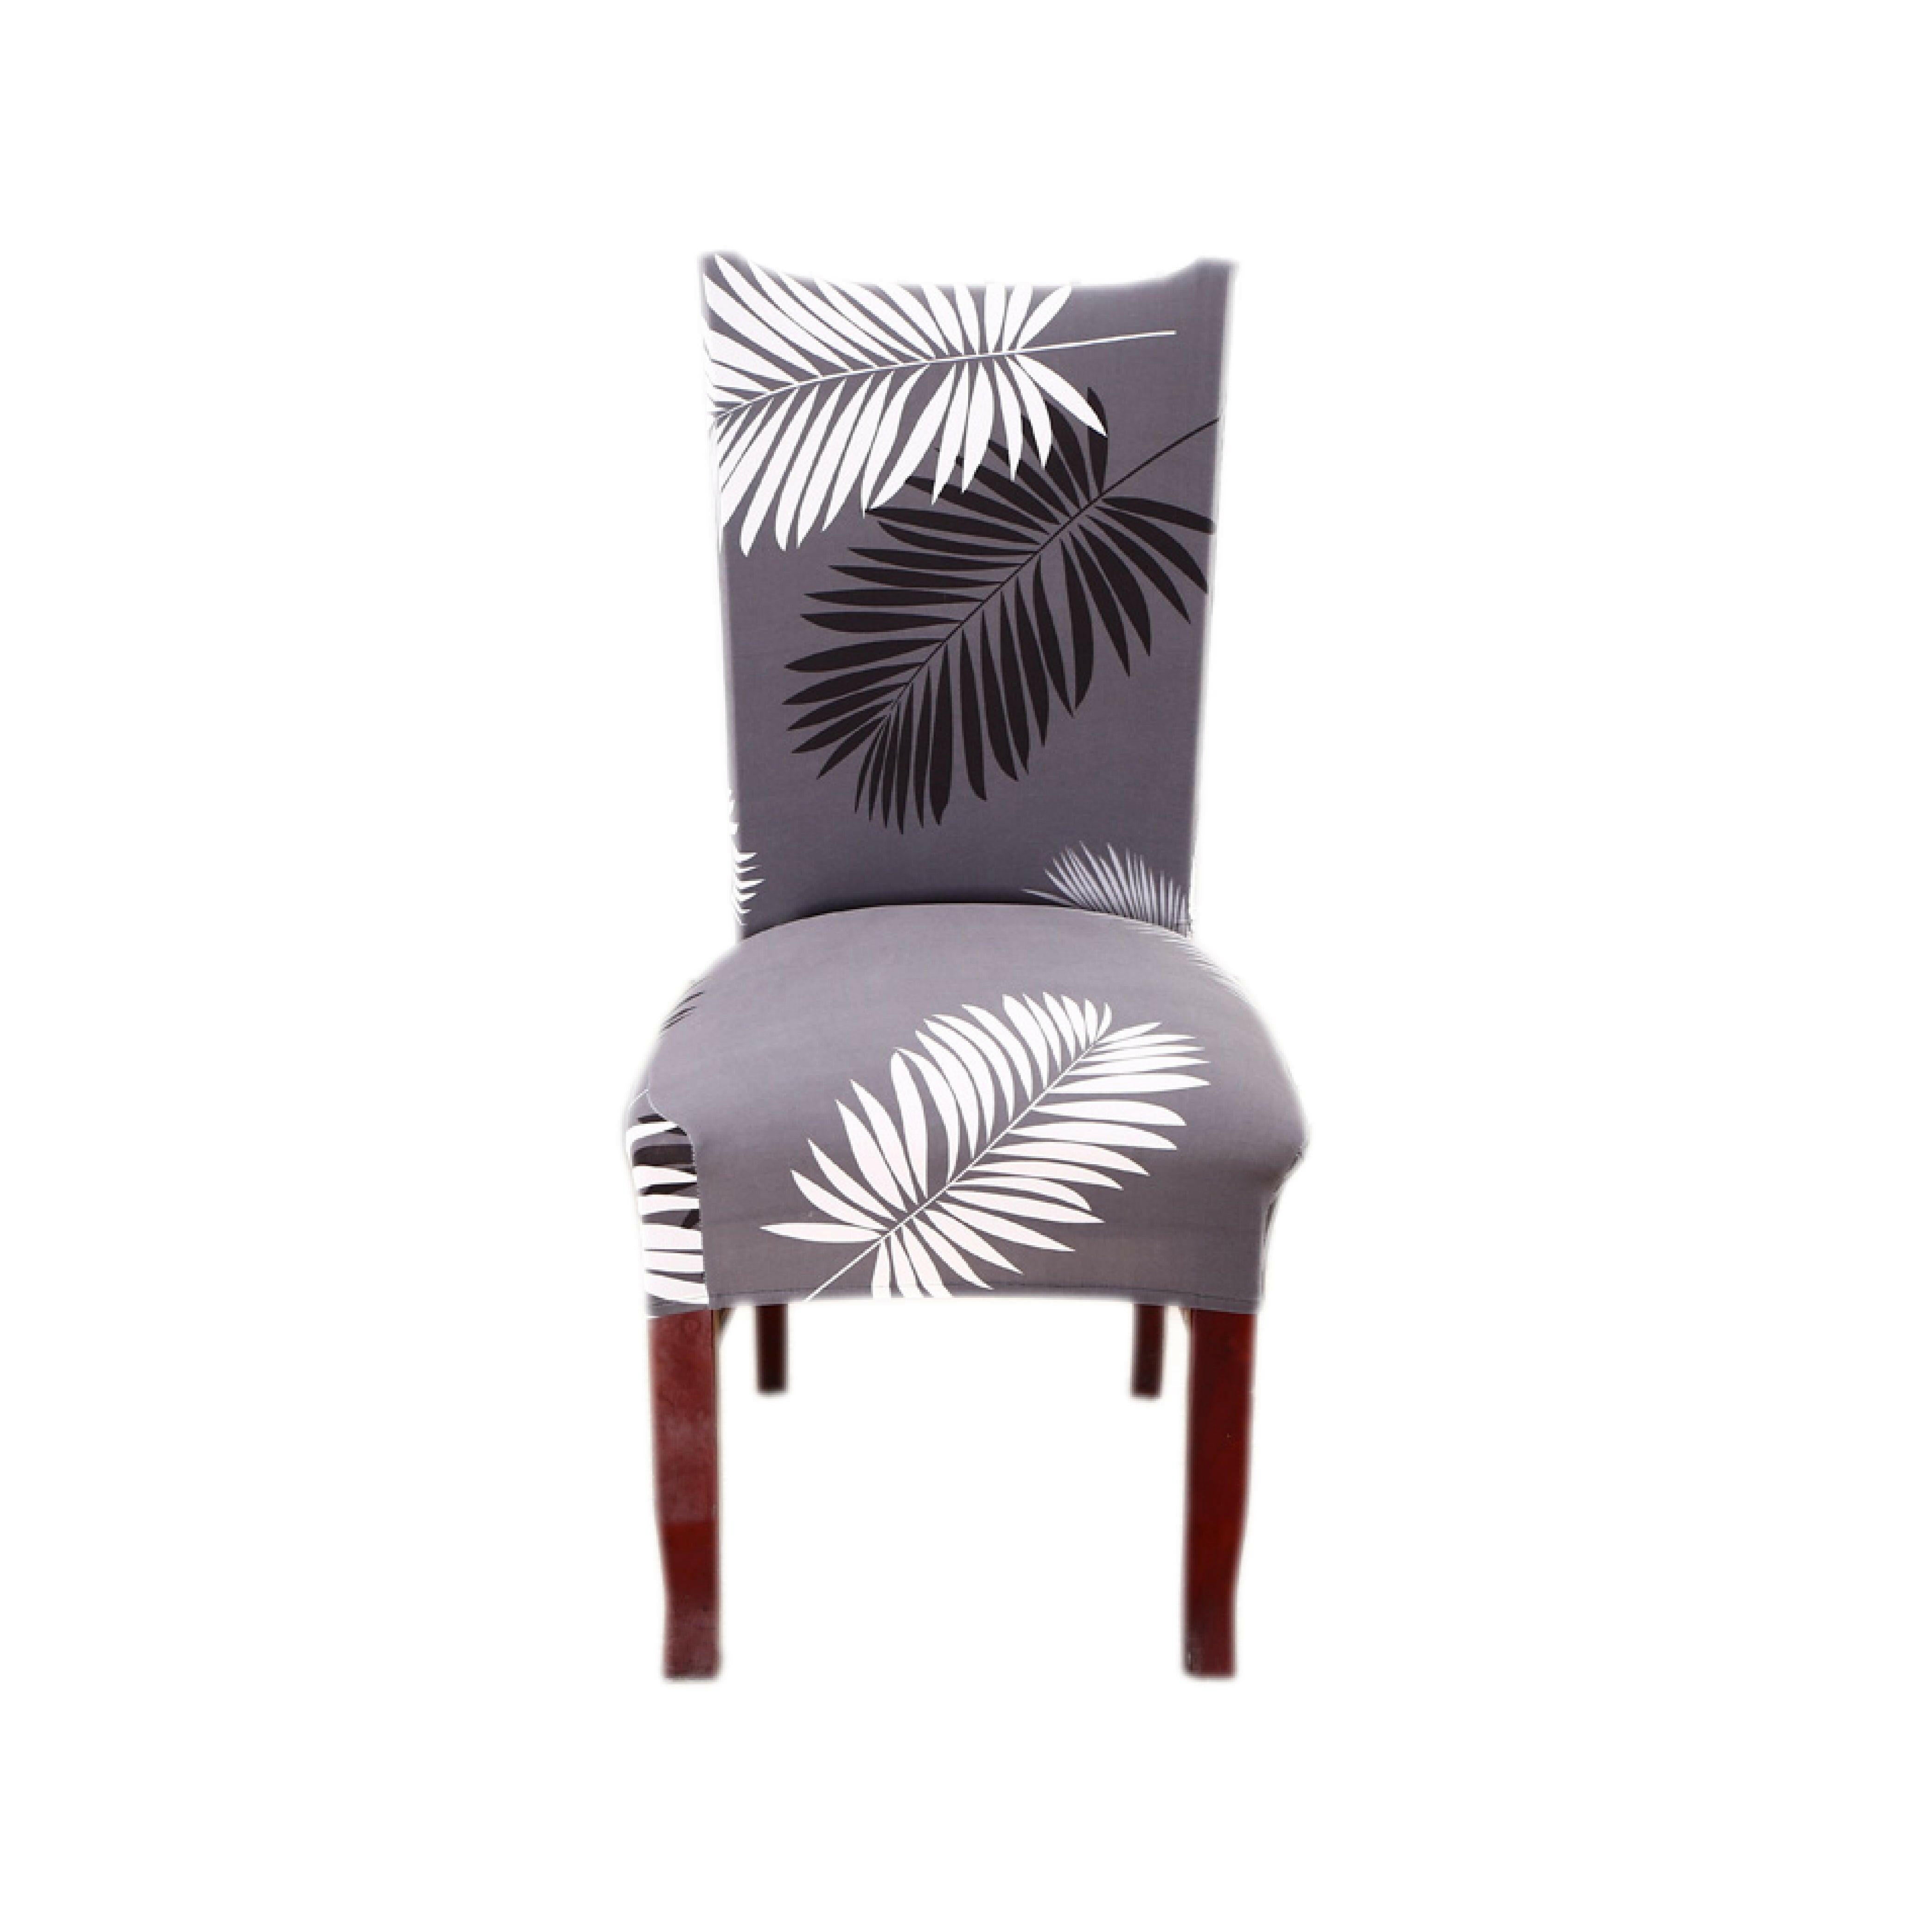 Hyper Cover Stretch Dining Chair Covers with Patterns Black Feather | Chair Covers | Brilliant Home Living